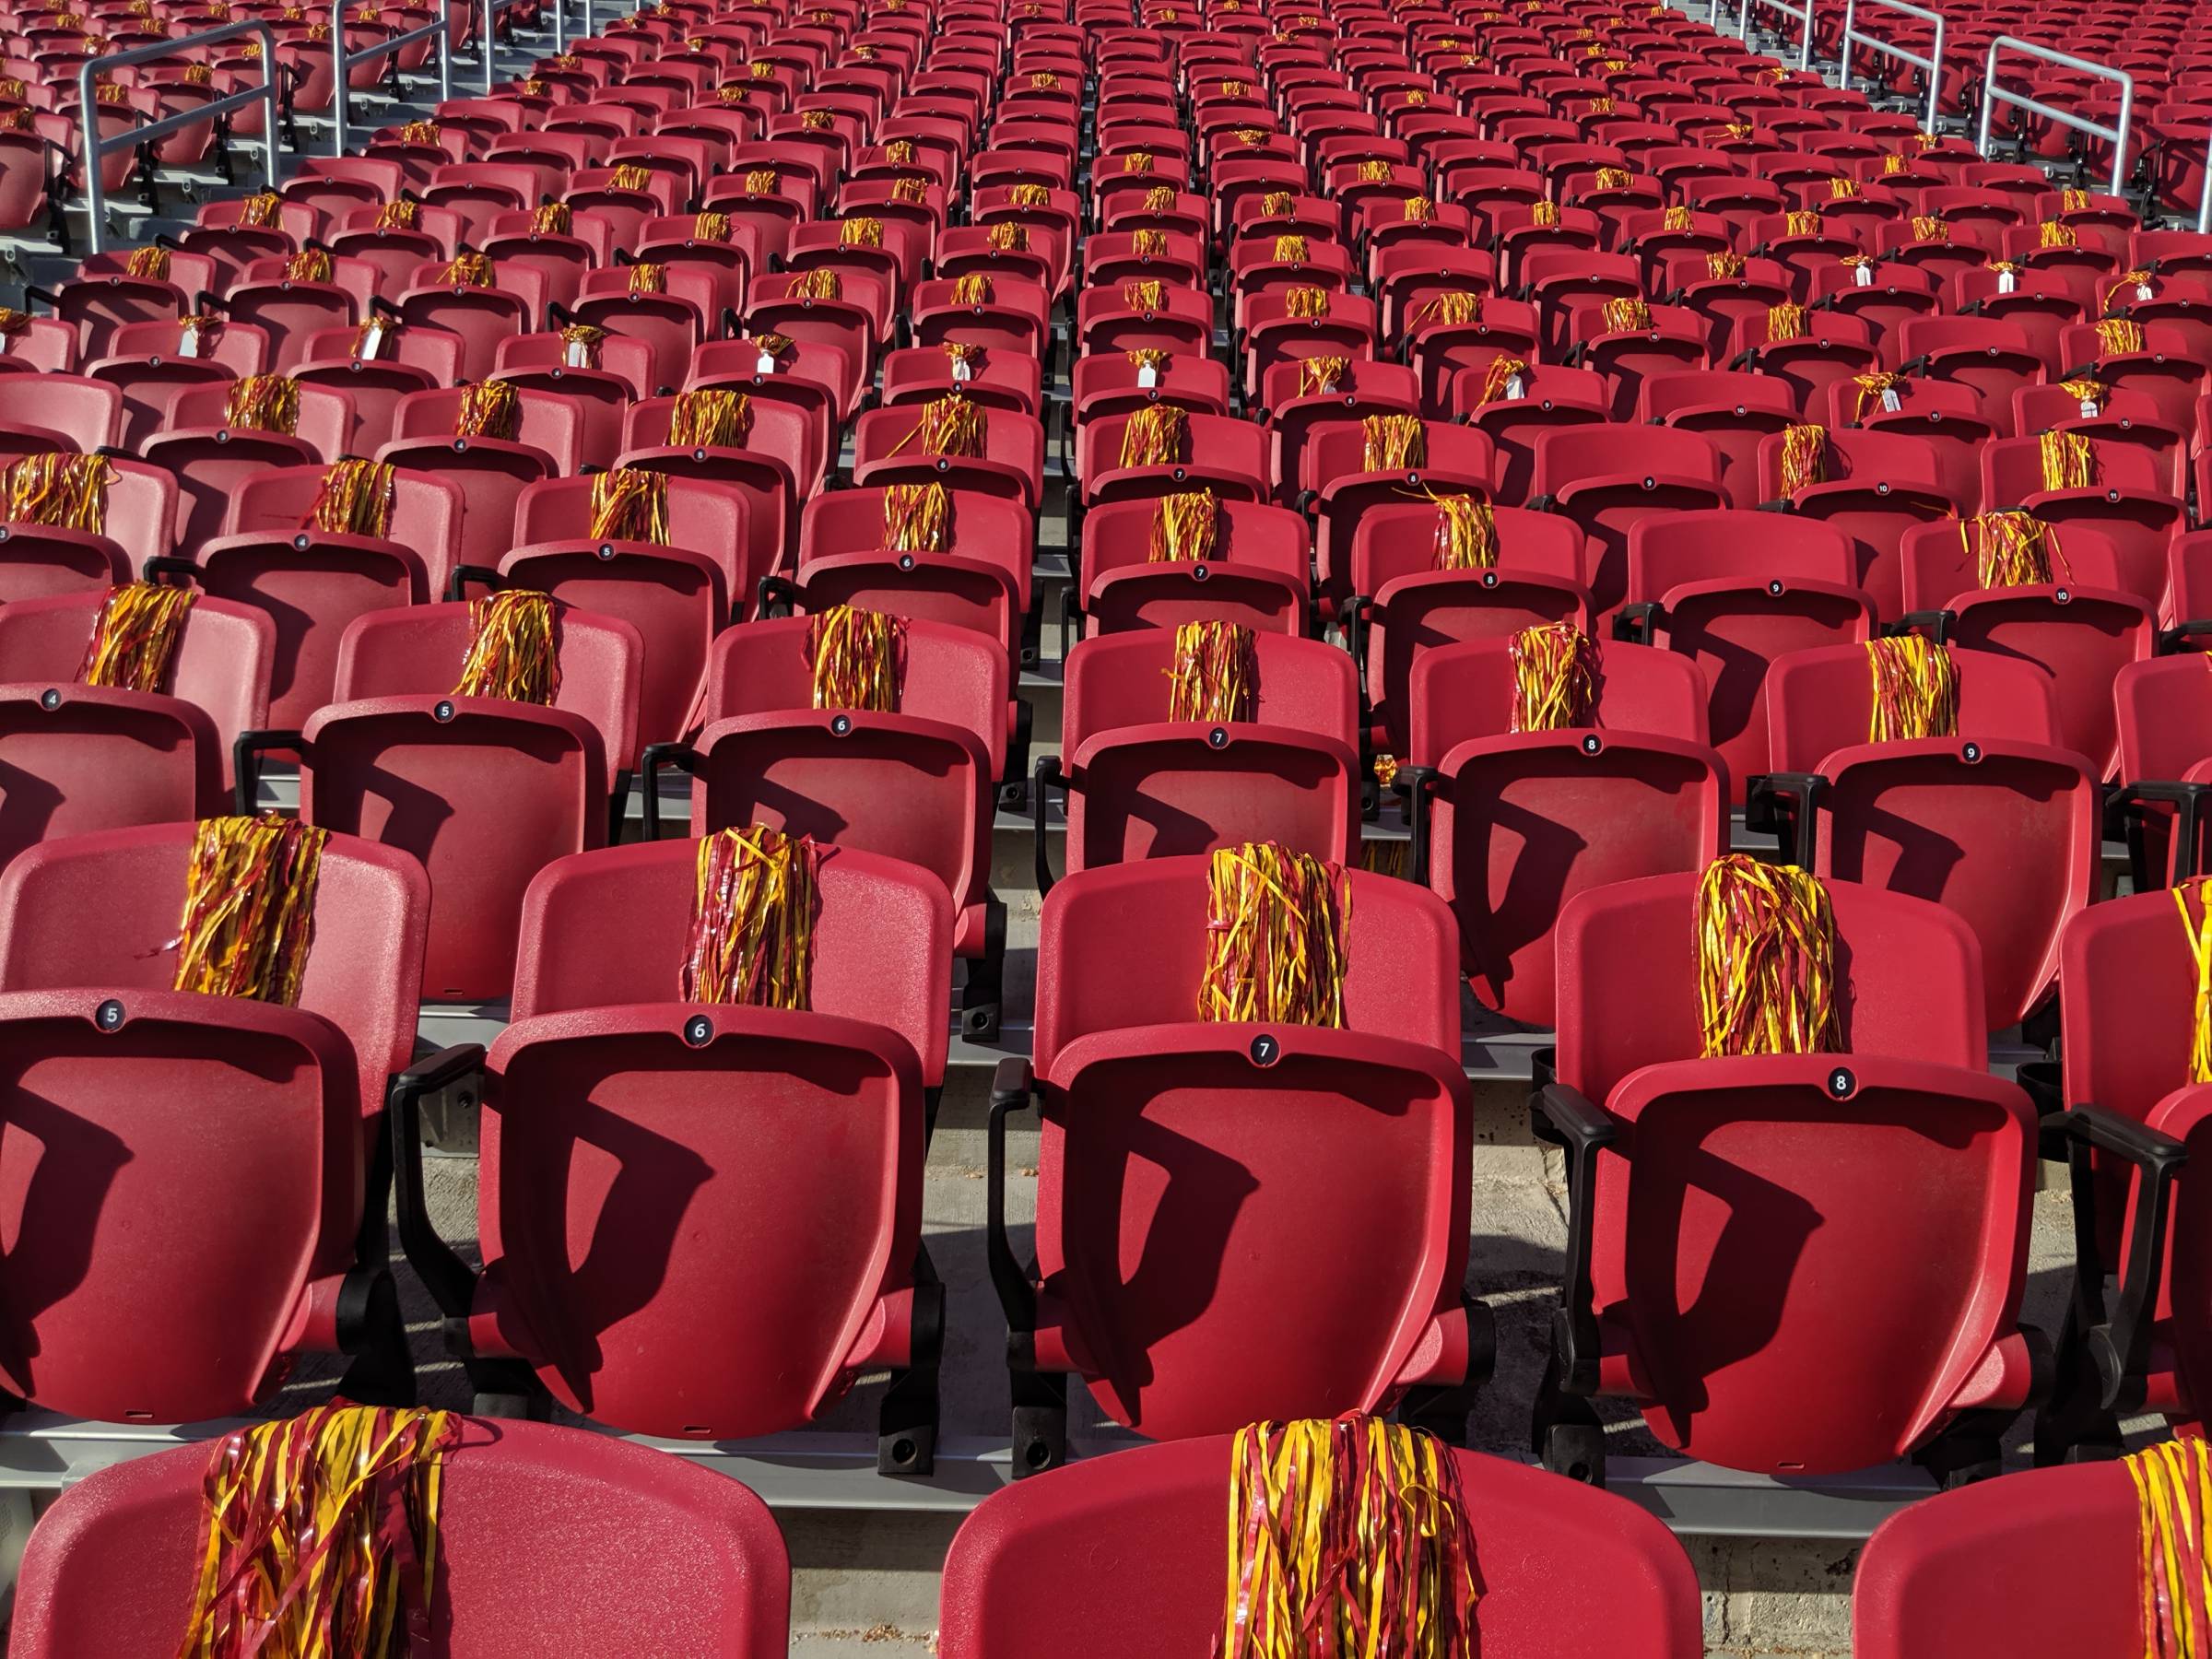 Student Sections for USC games